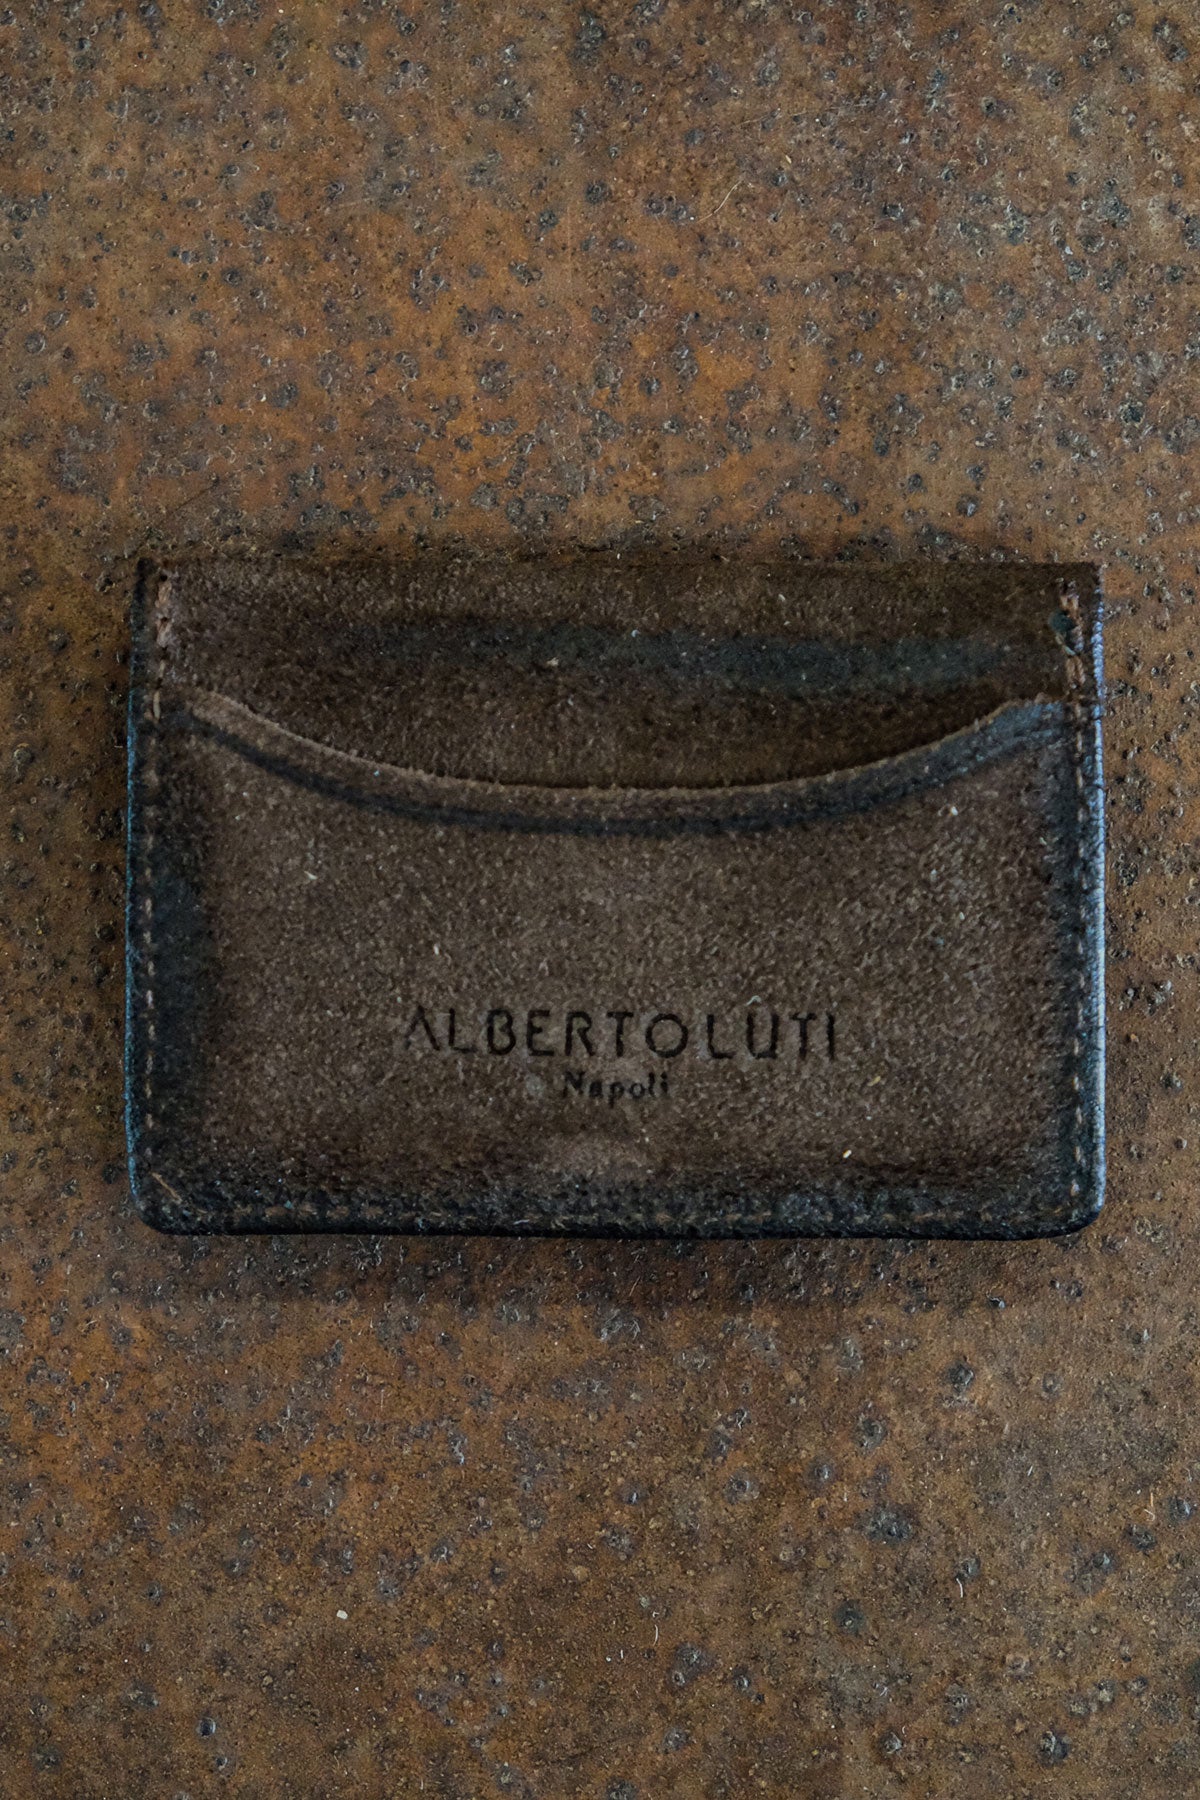 Alberto Luti - Card and Coins Holder in Suede Dark Brown Leather